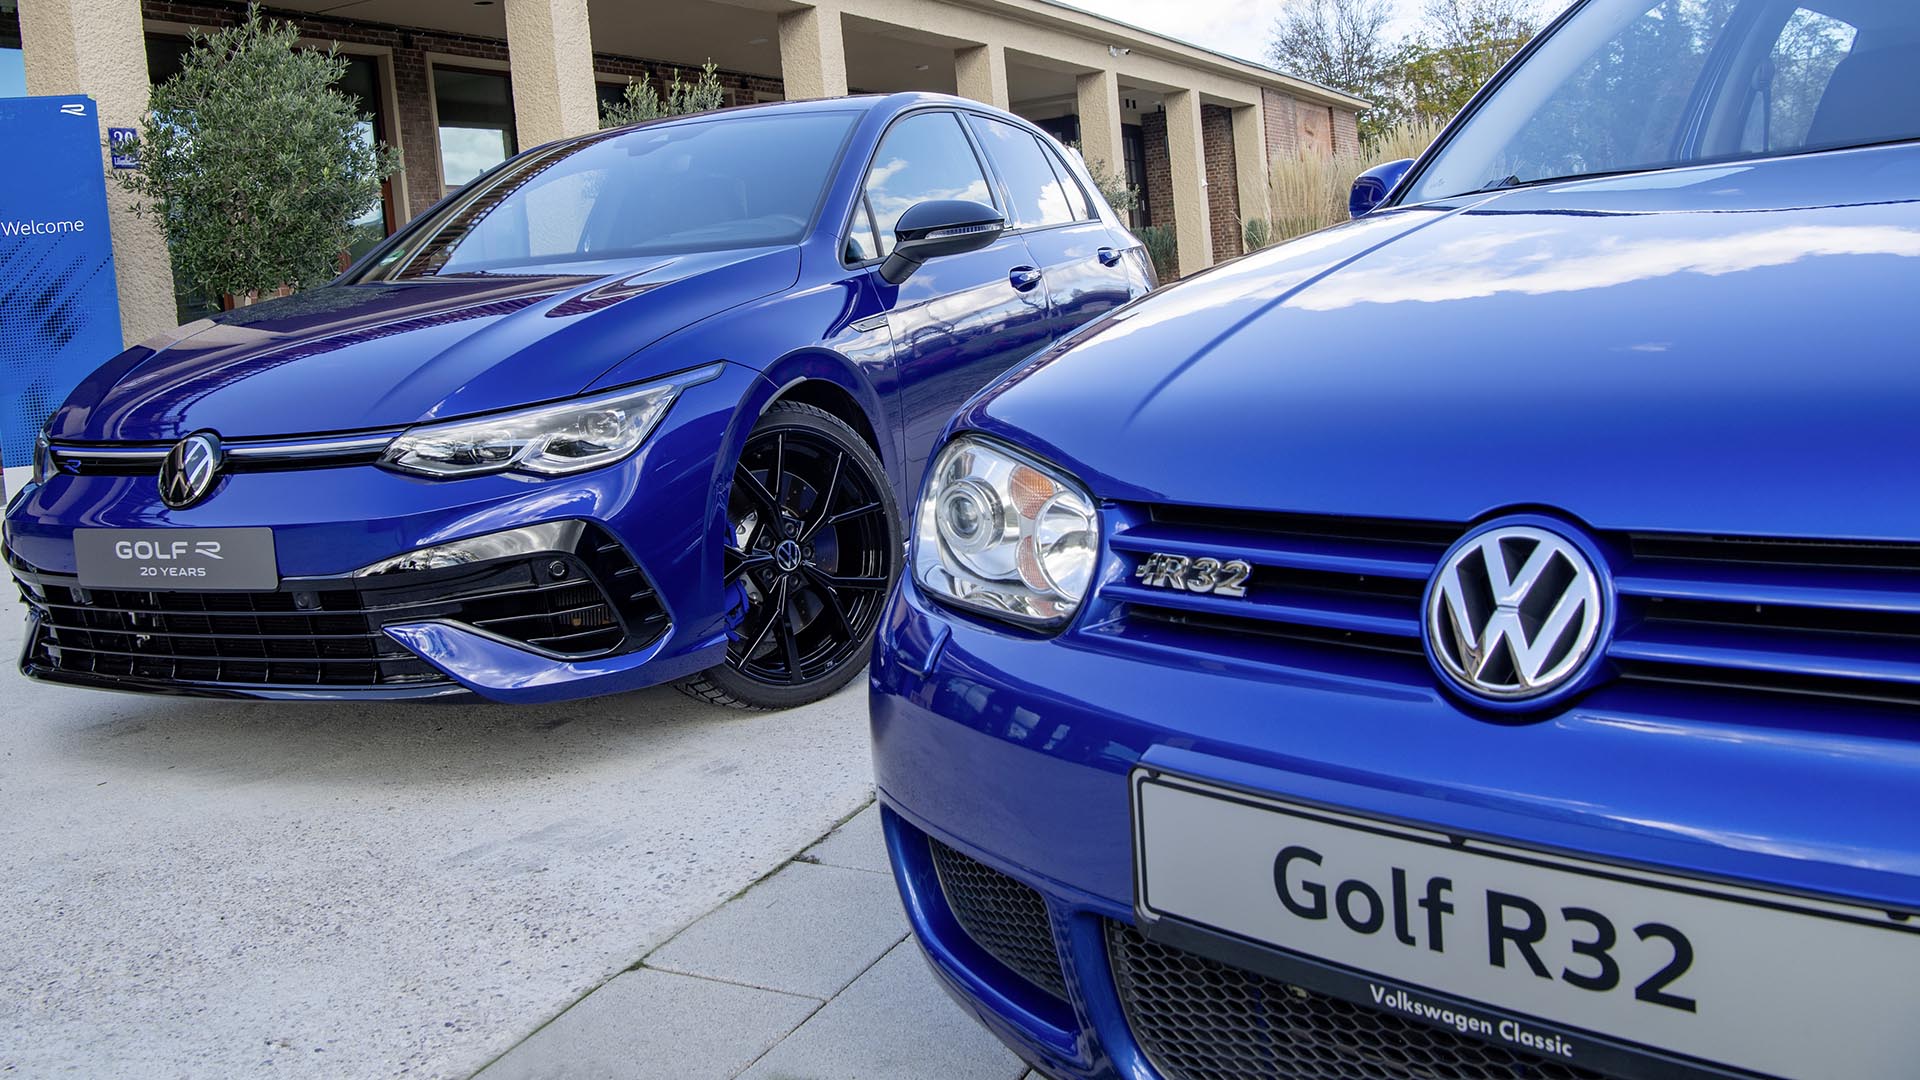 10 reasons to love the Golf R | AutoTrader